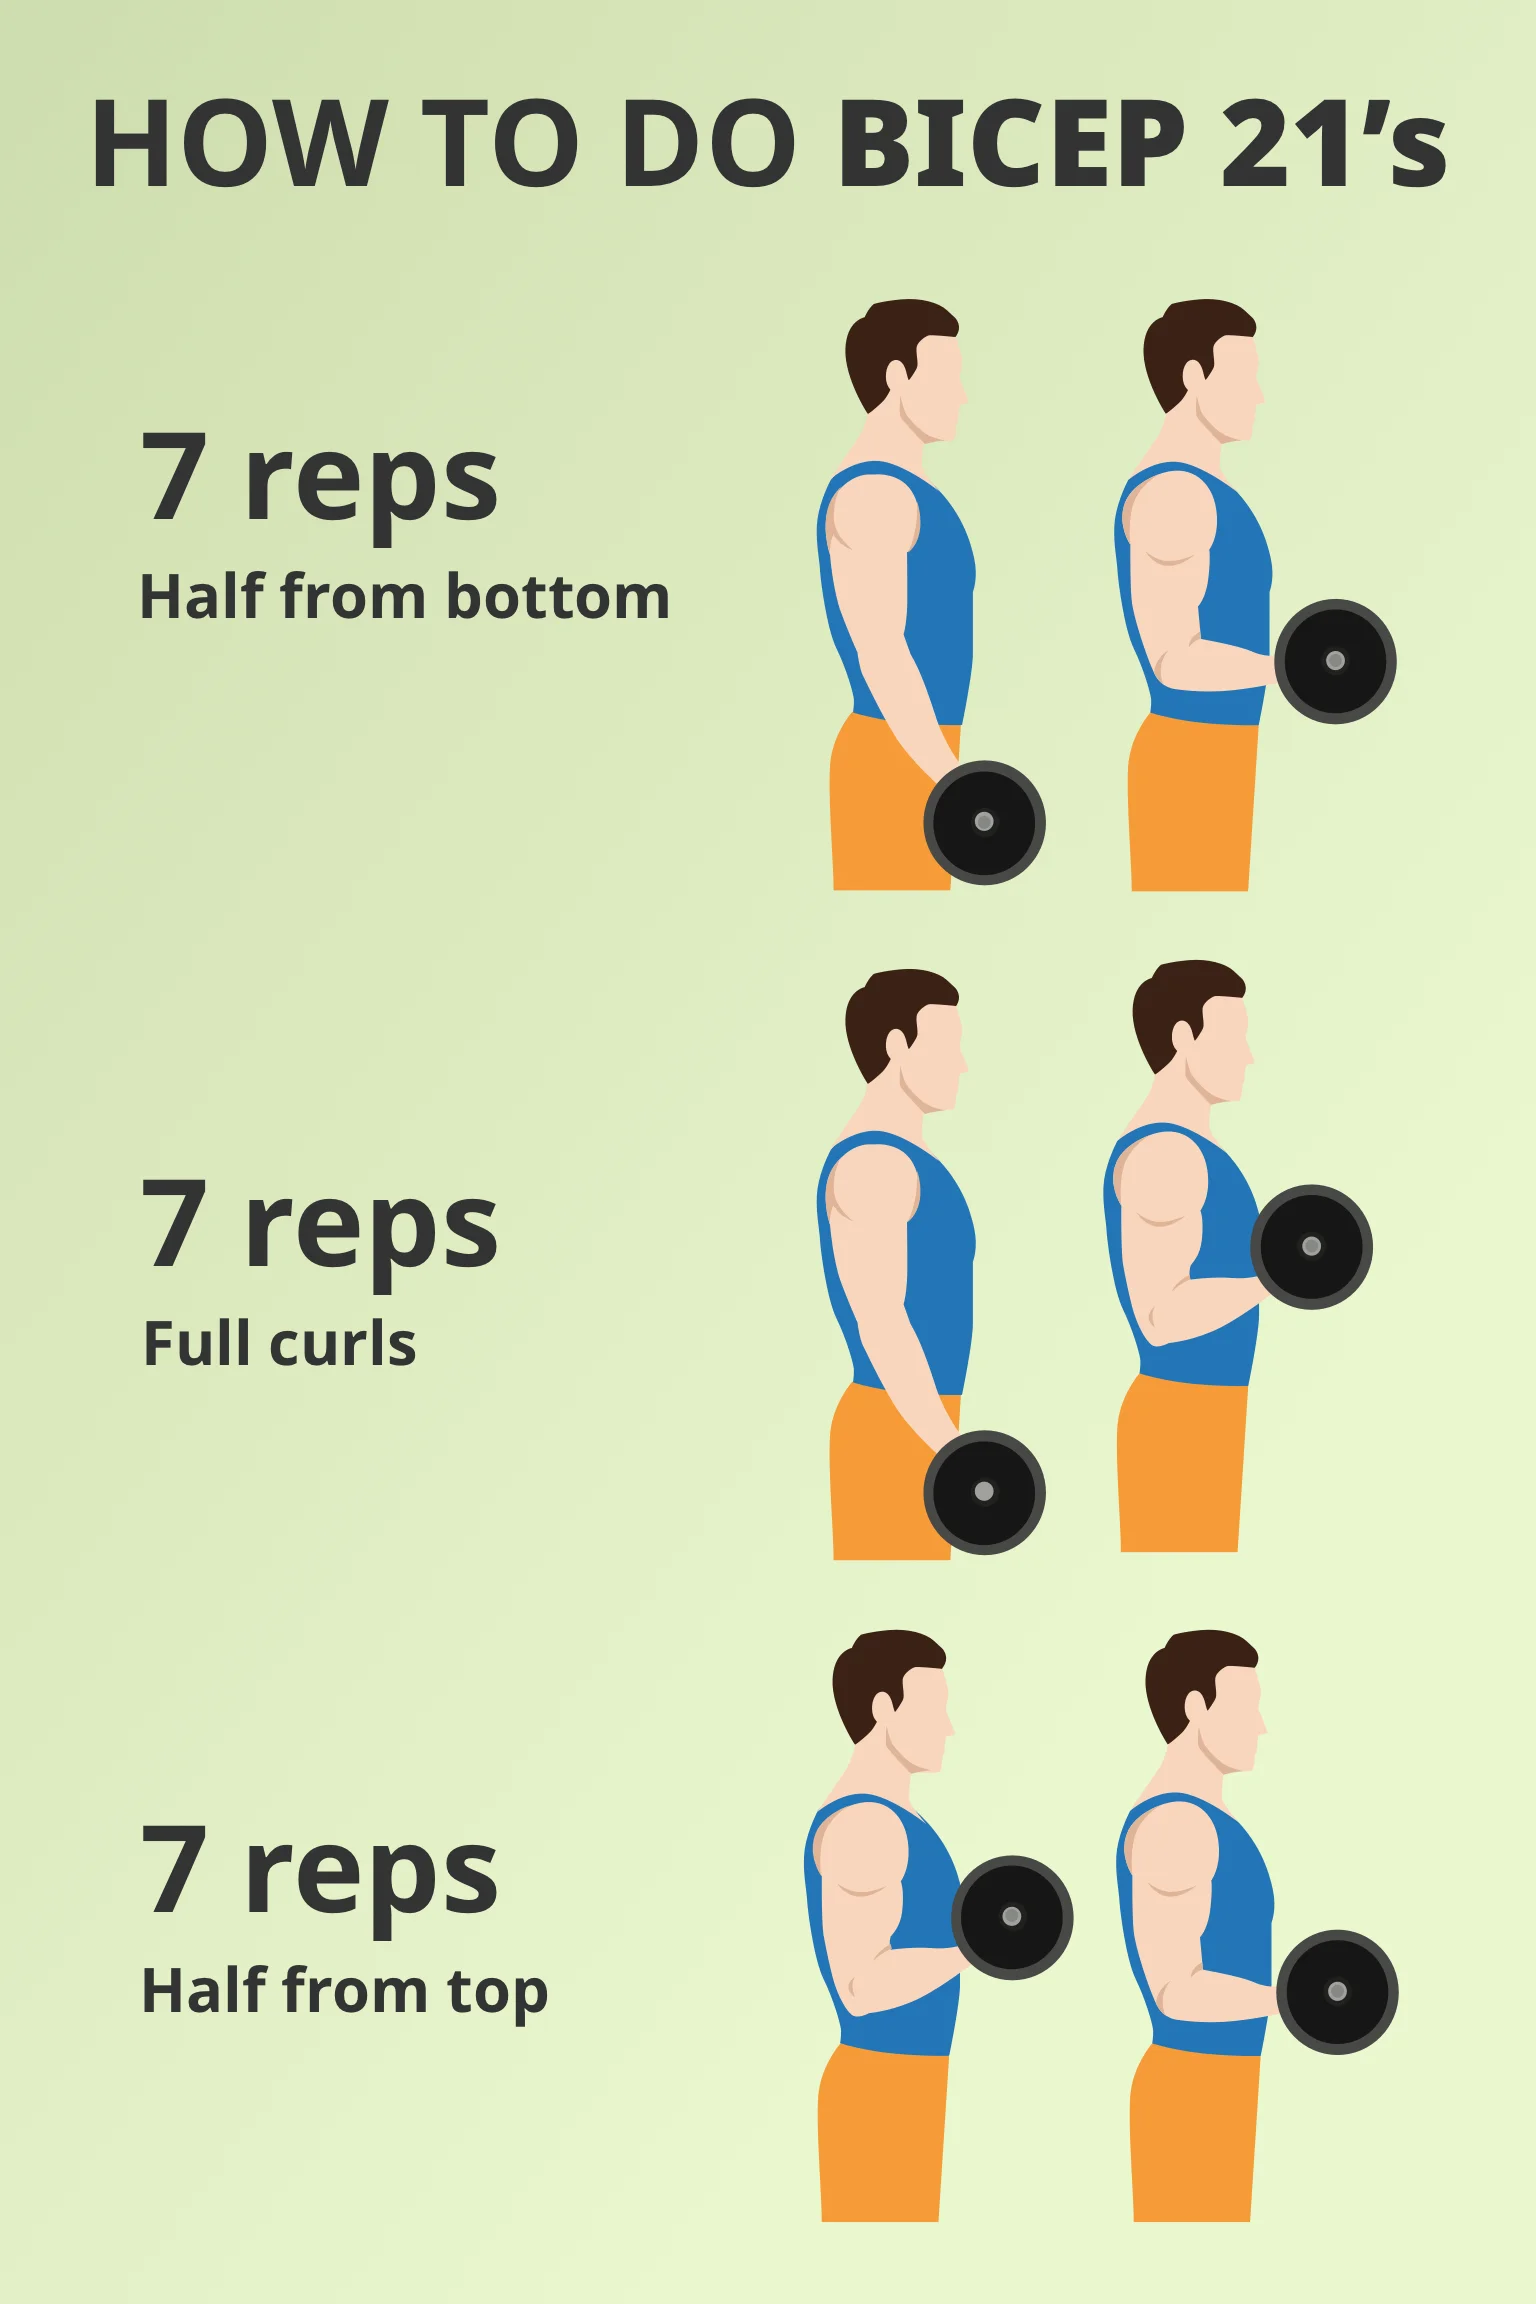 How to do Bicep 21's